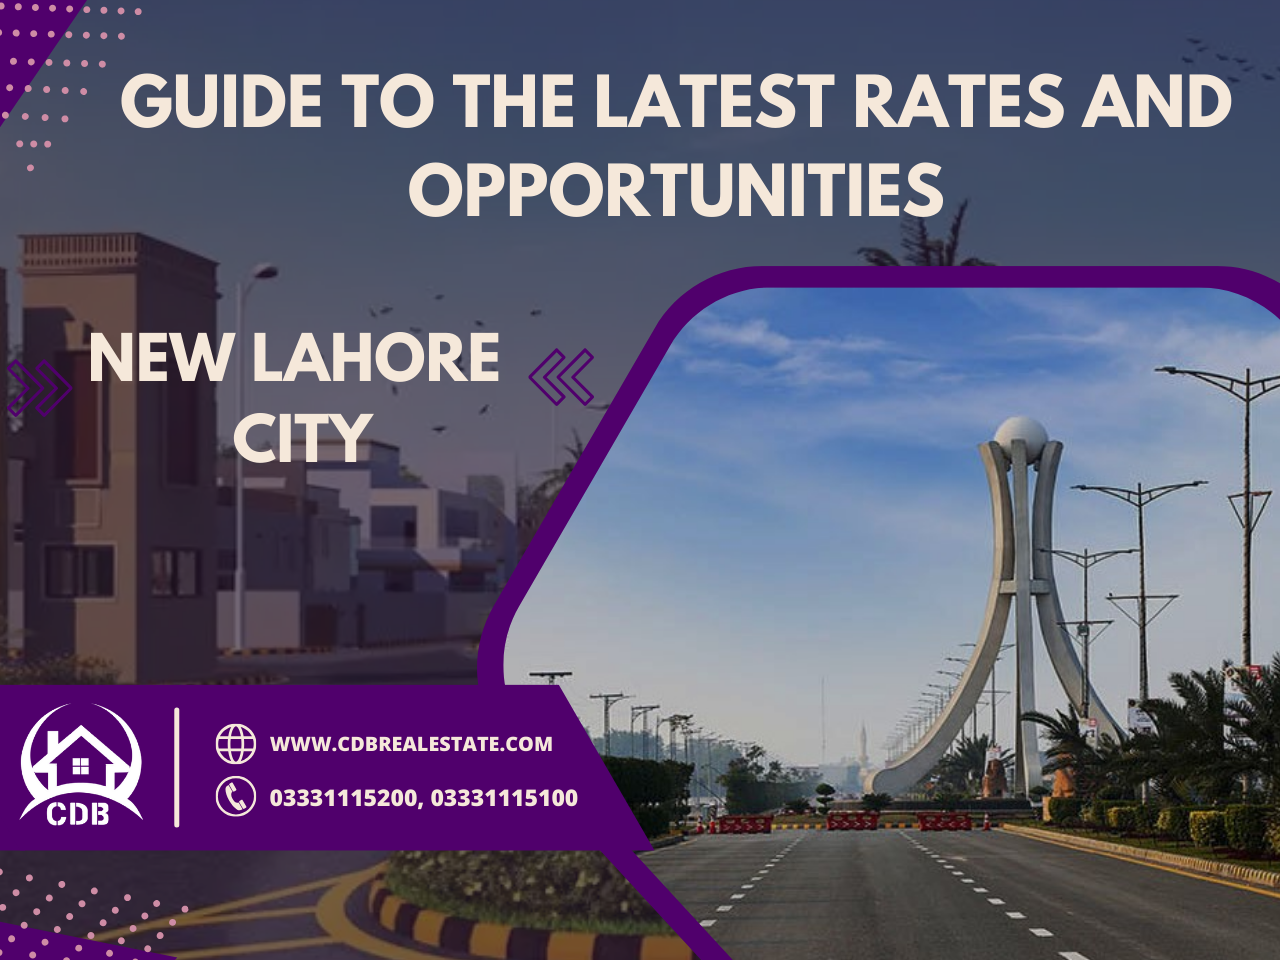 New Lahore City: Guide to the Latest Rates and Opportunities